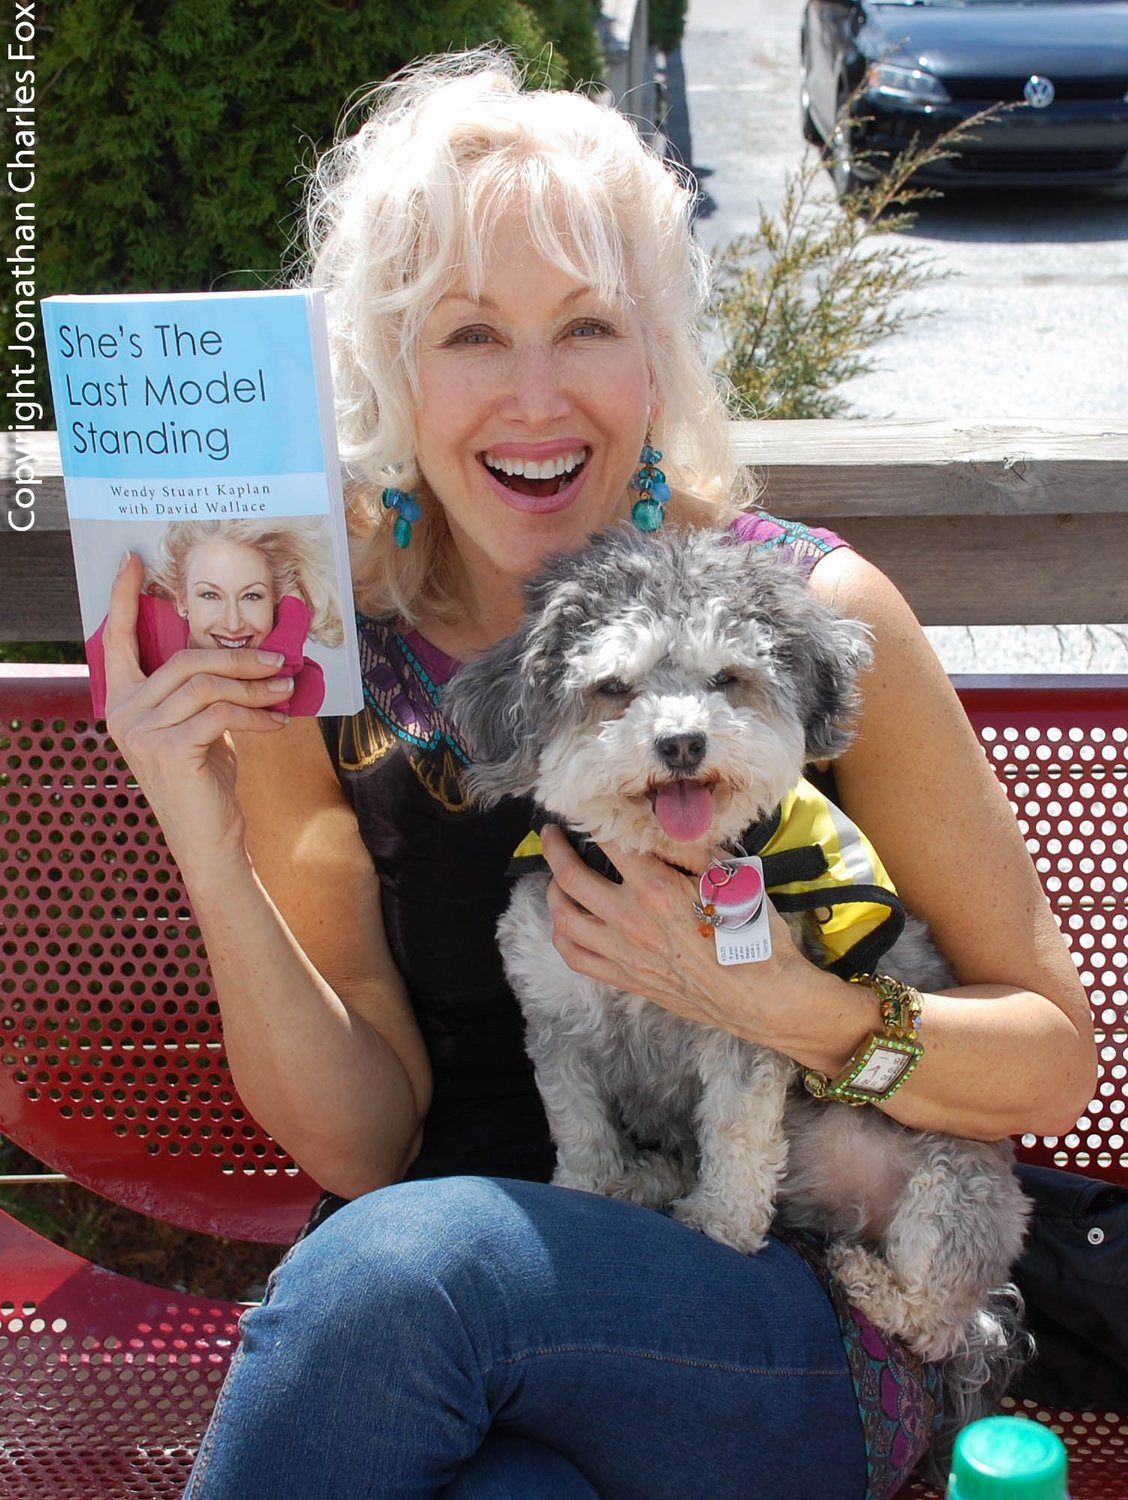 Dharma is always happy to smile for the camera, like that time she posed with celebrity/author/filmmaker/model Wendy Stuart Kaplan in Milford, PA. Well, almost always. BOL!